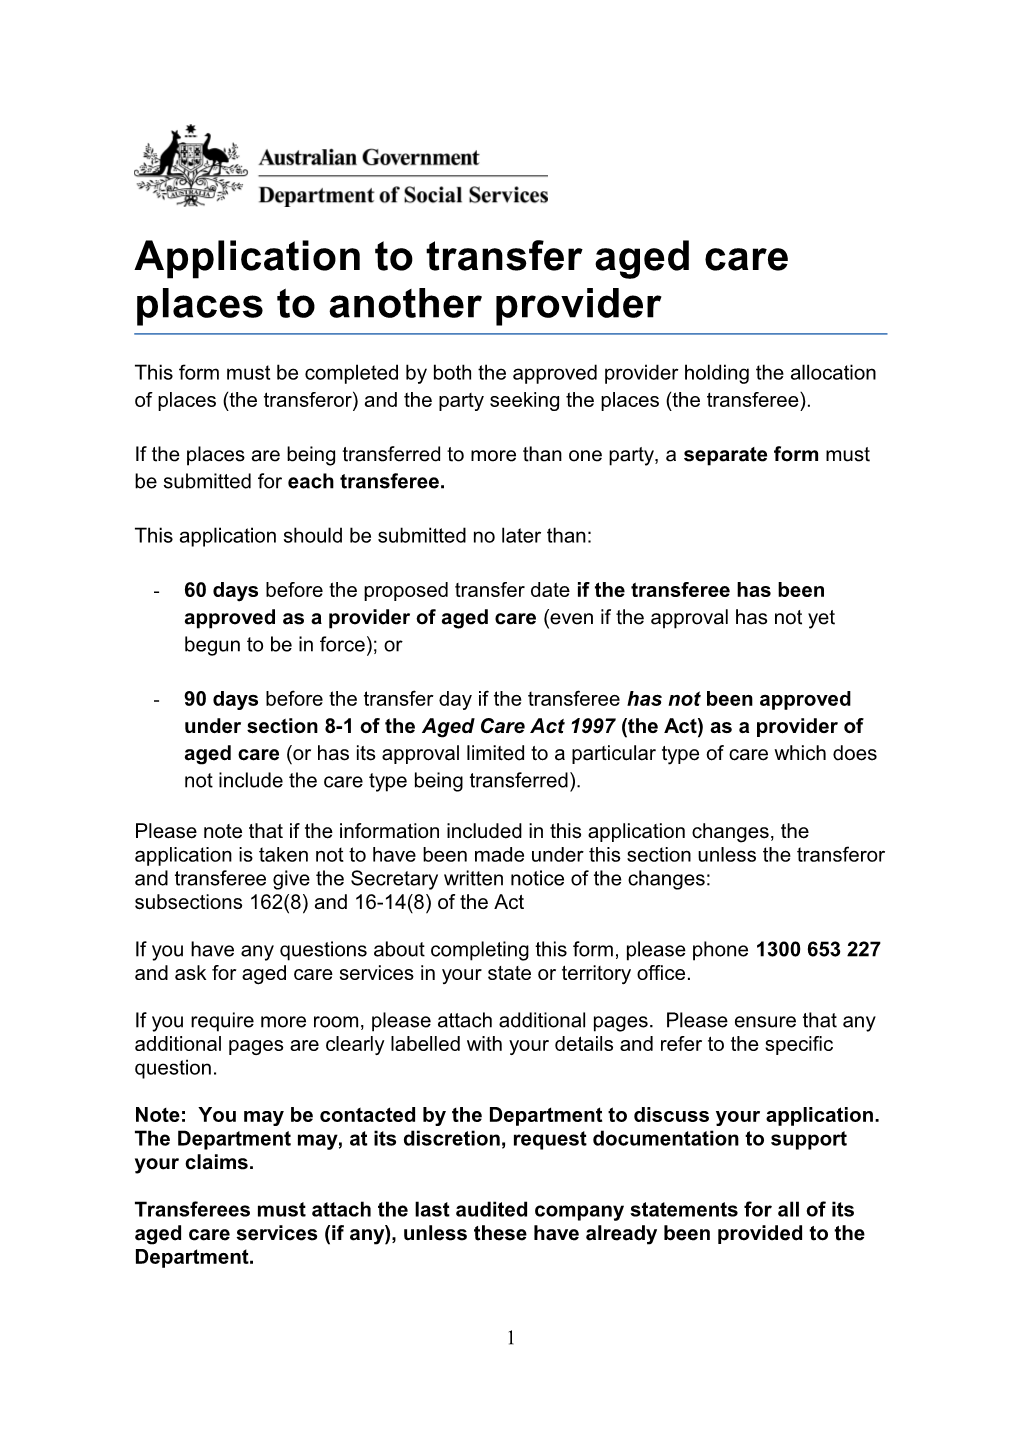 Application to Transfer Aged Care Places to Another Provider